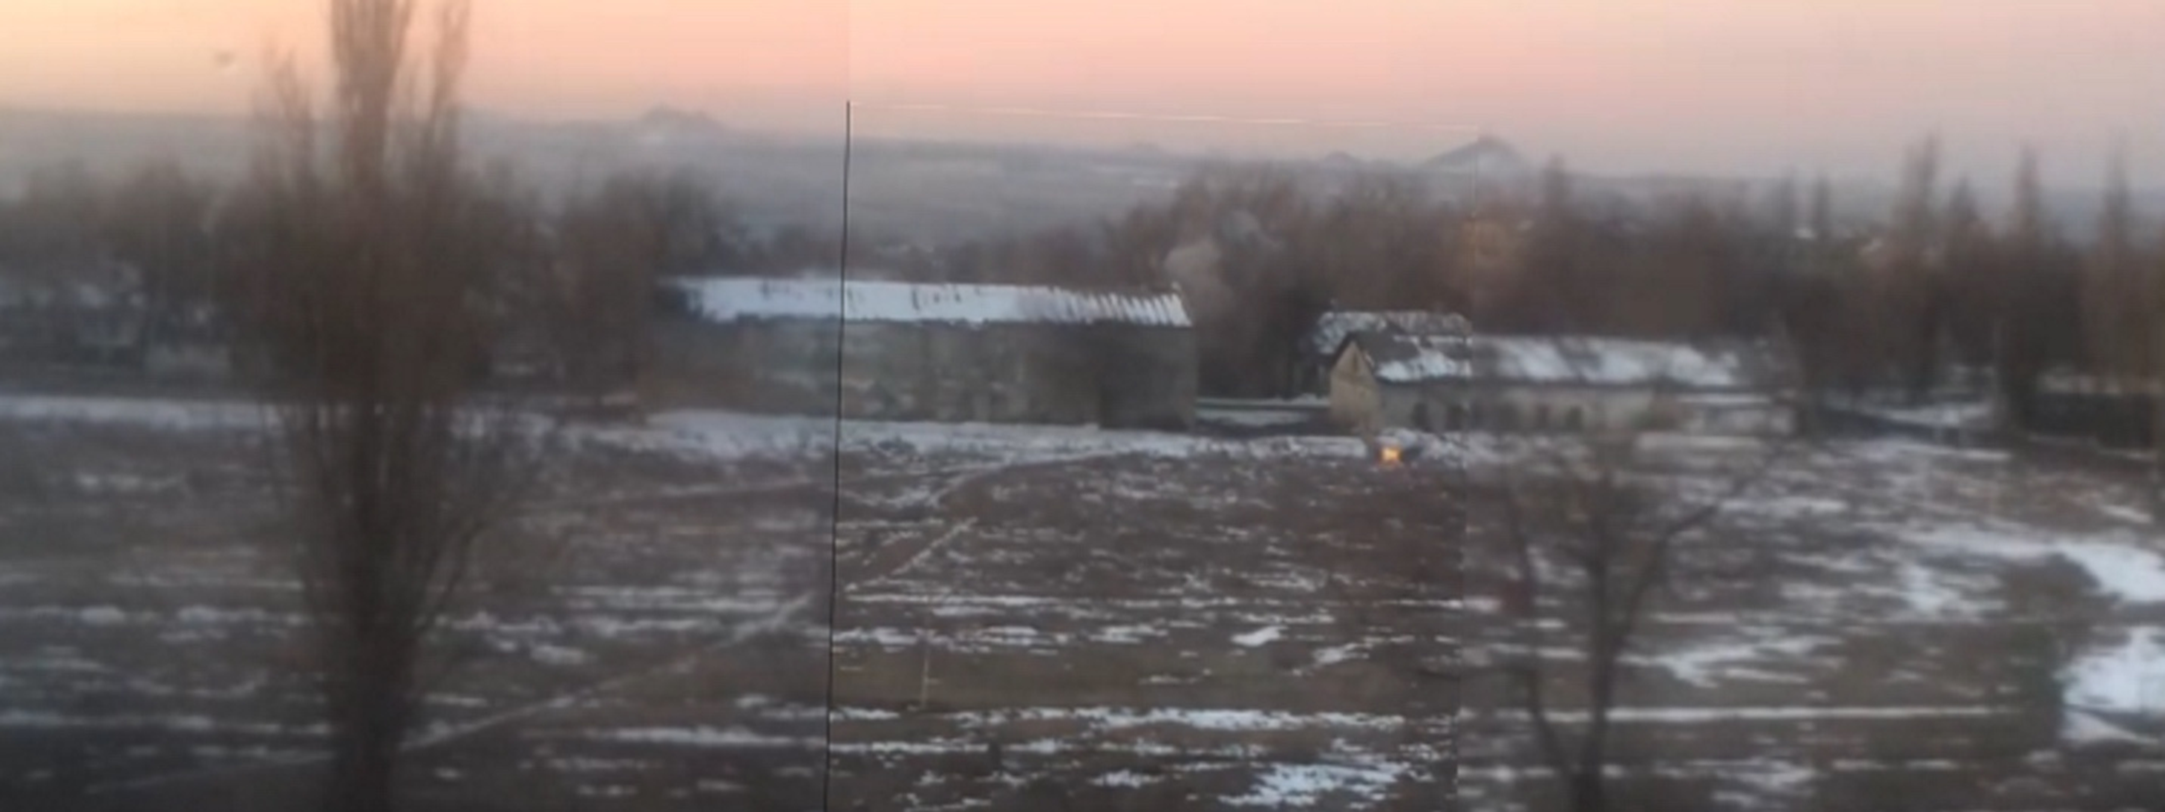 Early-morning flare-up in Luhansk